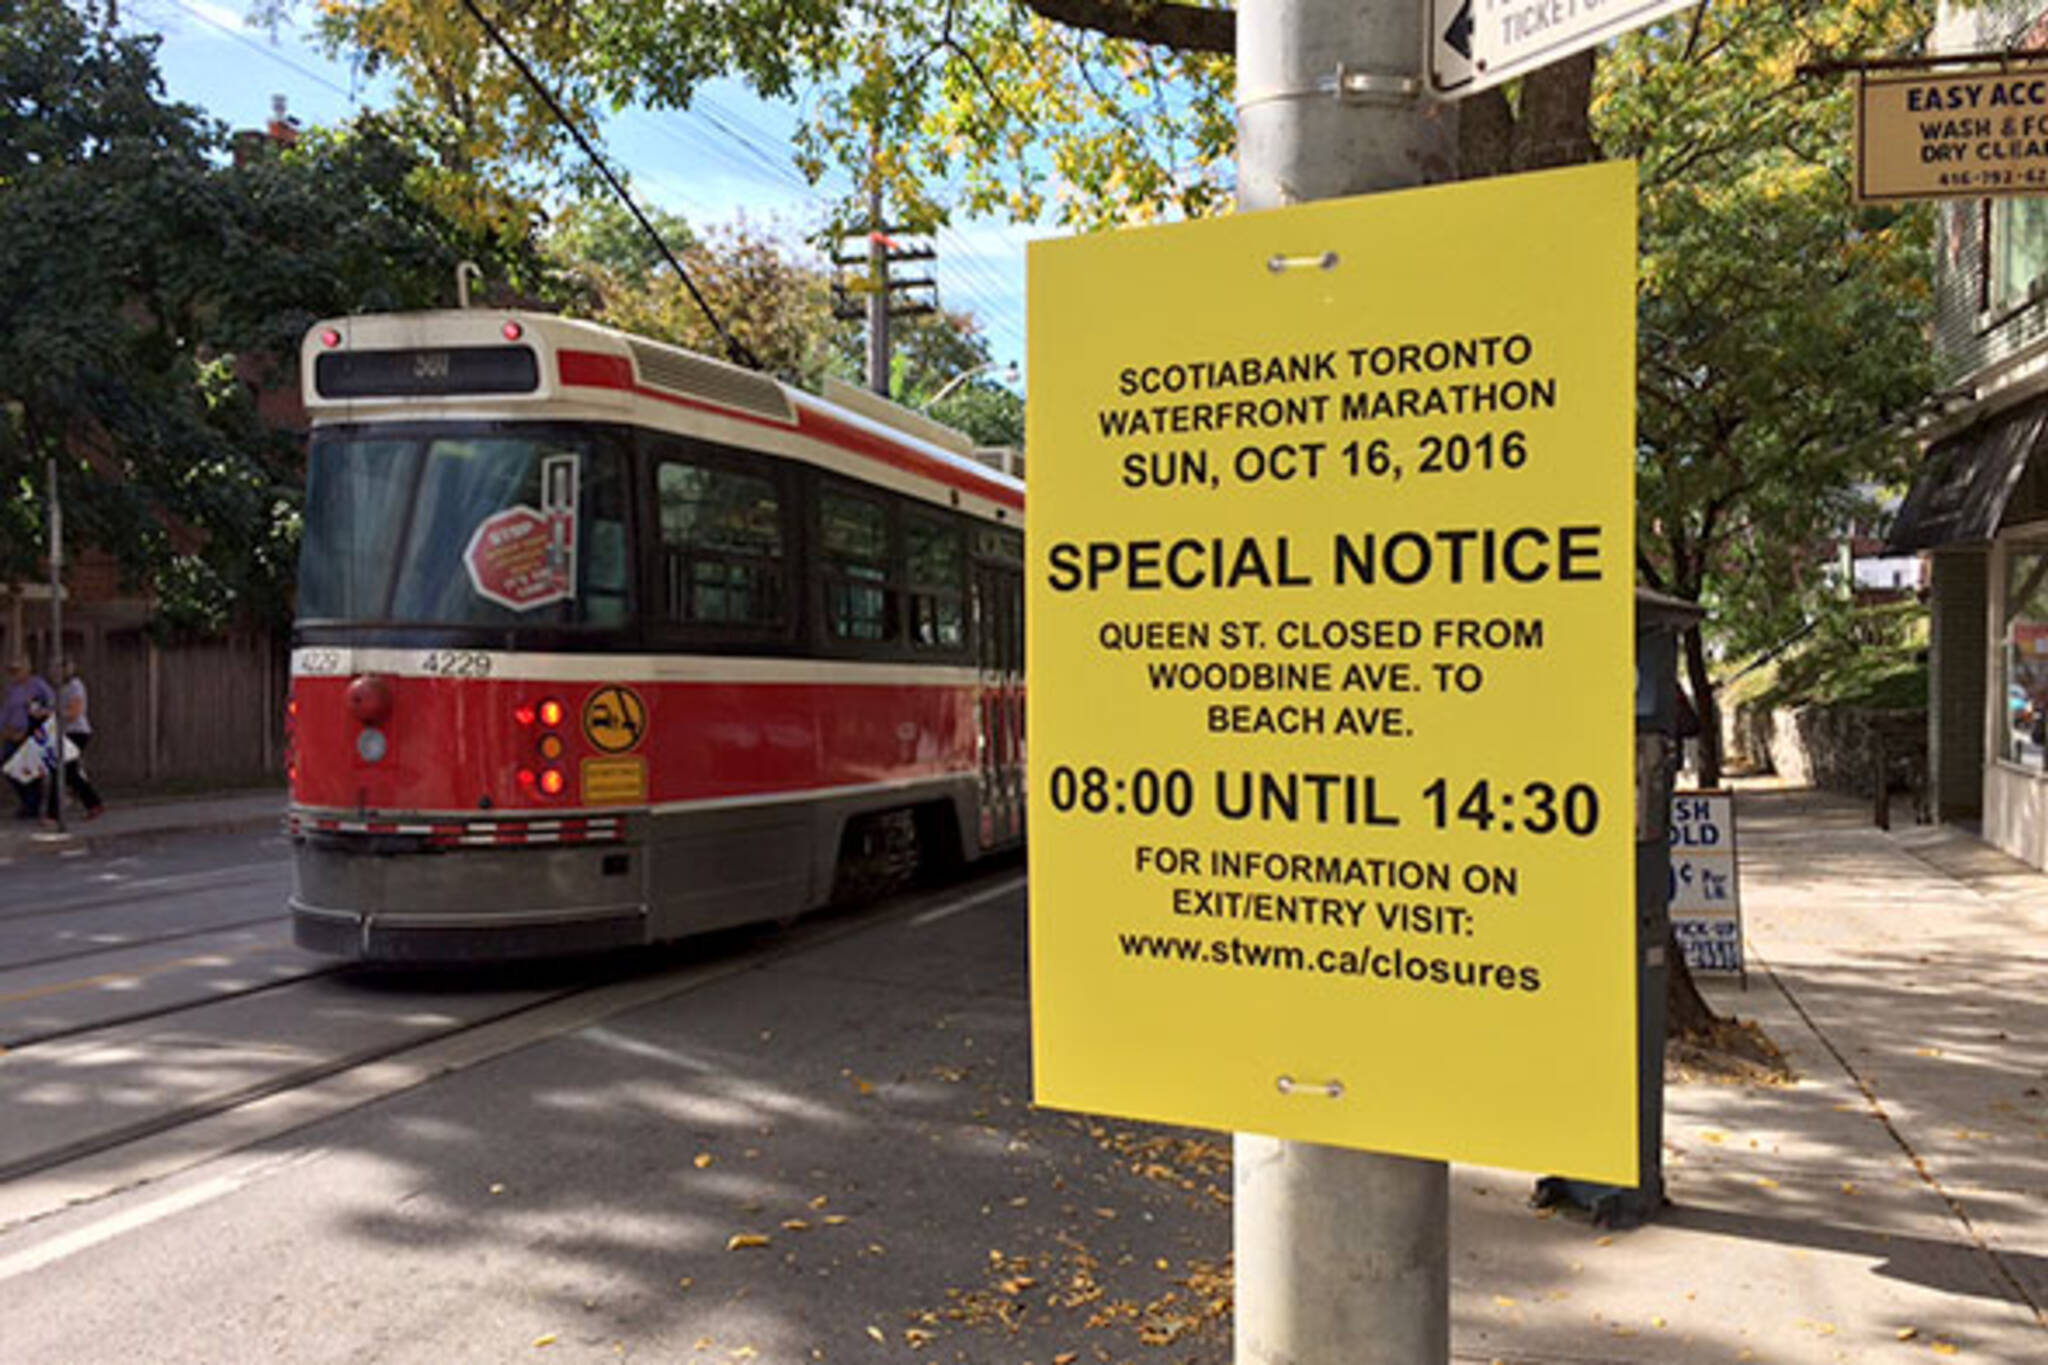 Scotiabank Toronto Waterfront Marathon road closures and route info